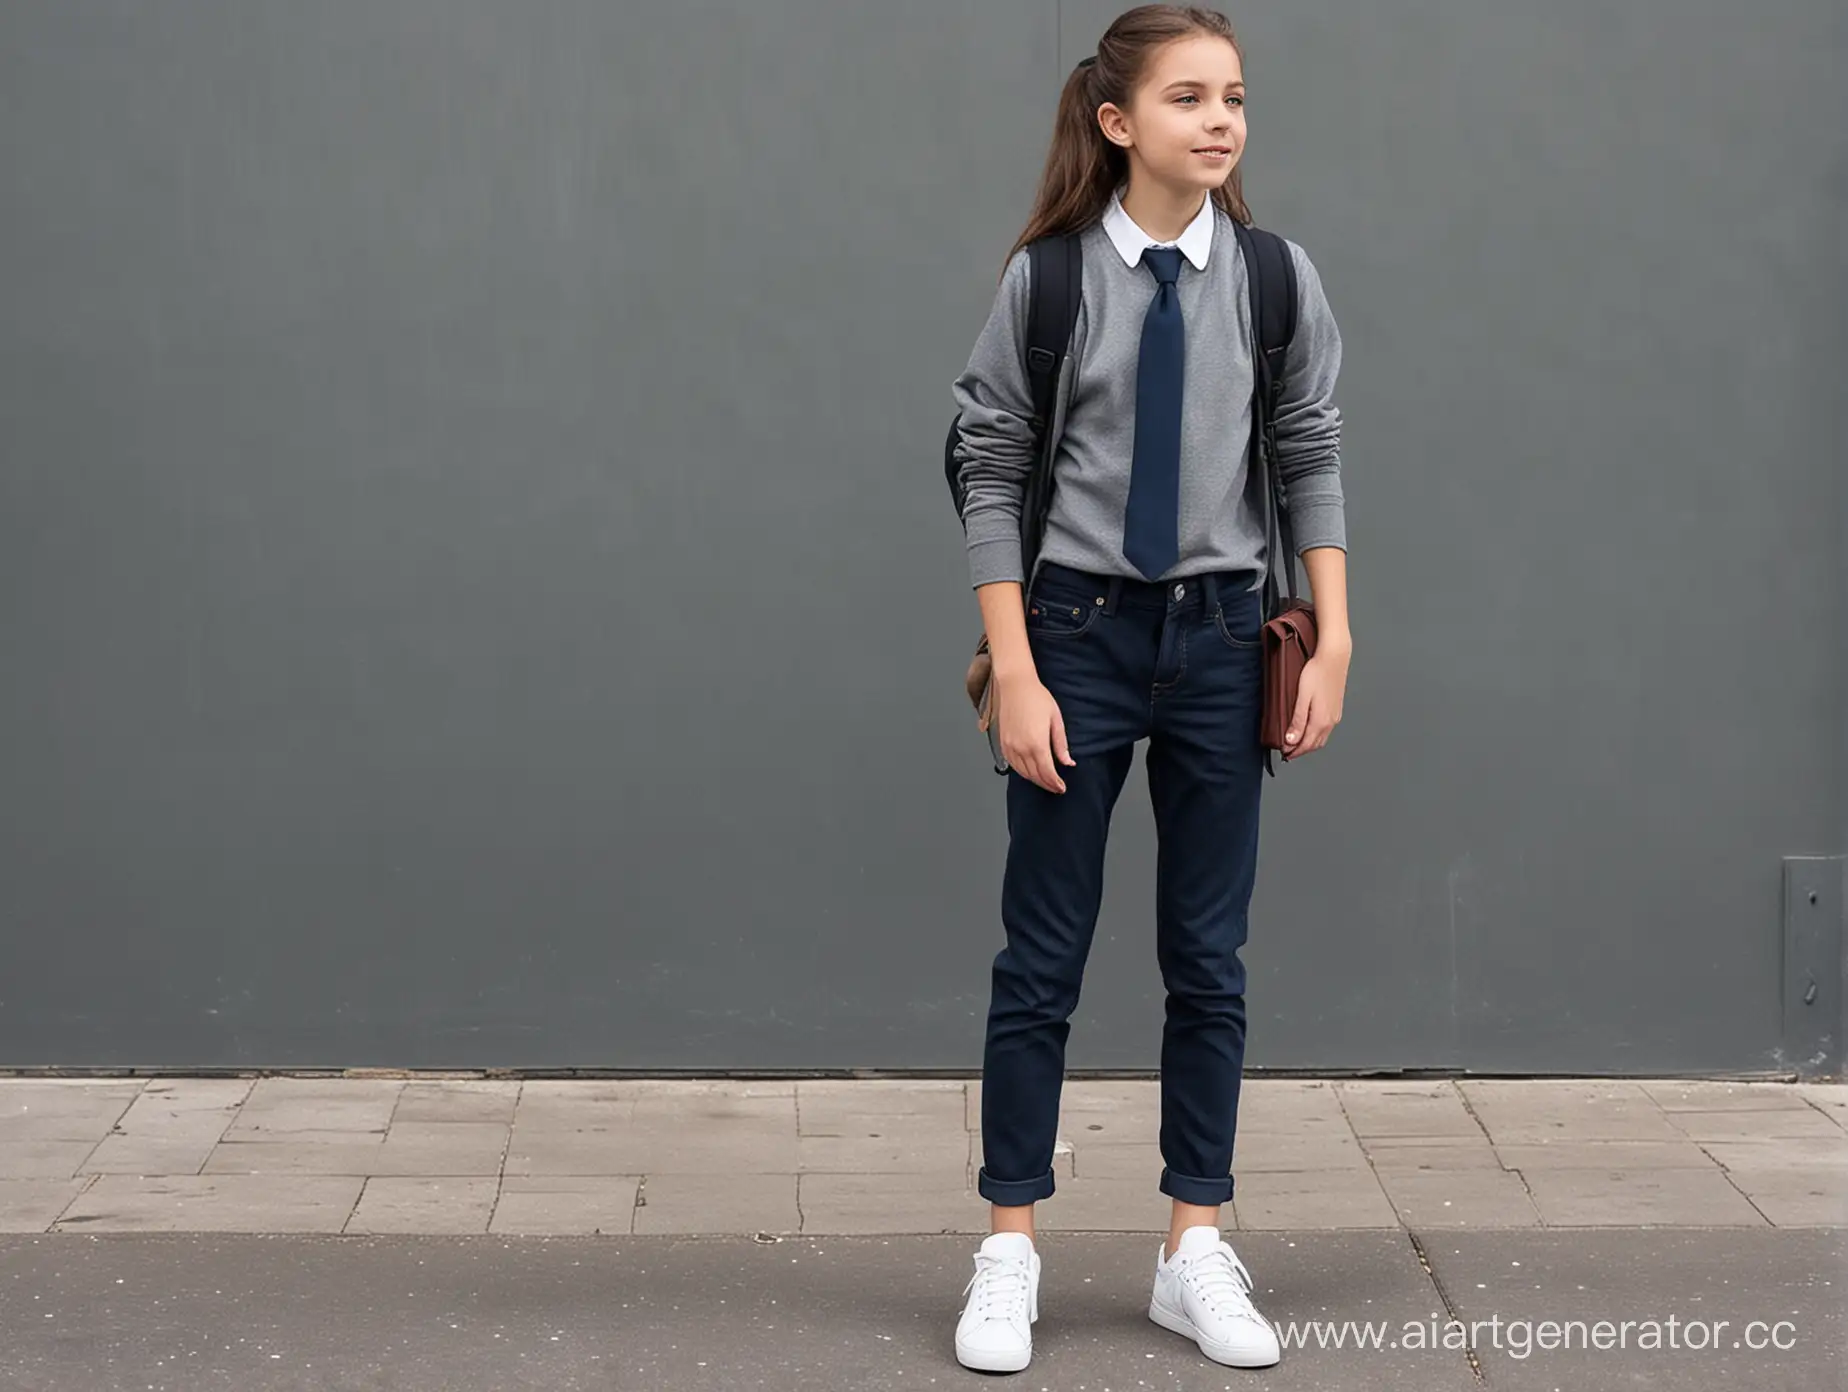 Comfortable-and-Stylish-Future-School-Uniforms-for-Boys-and-Girls